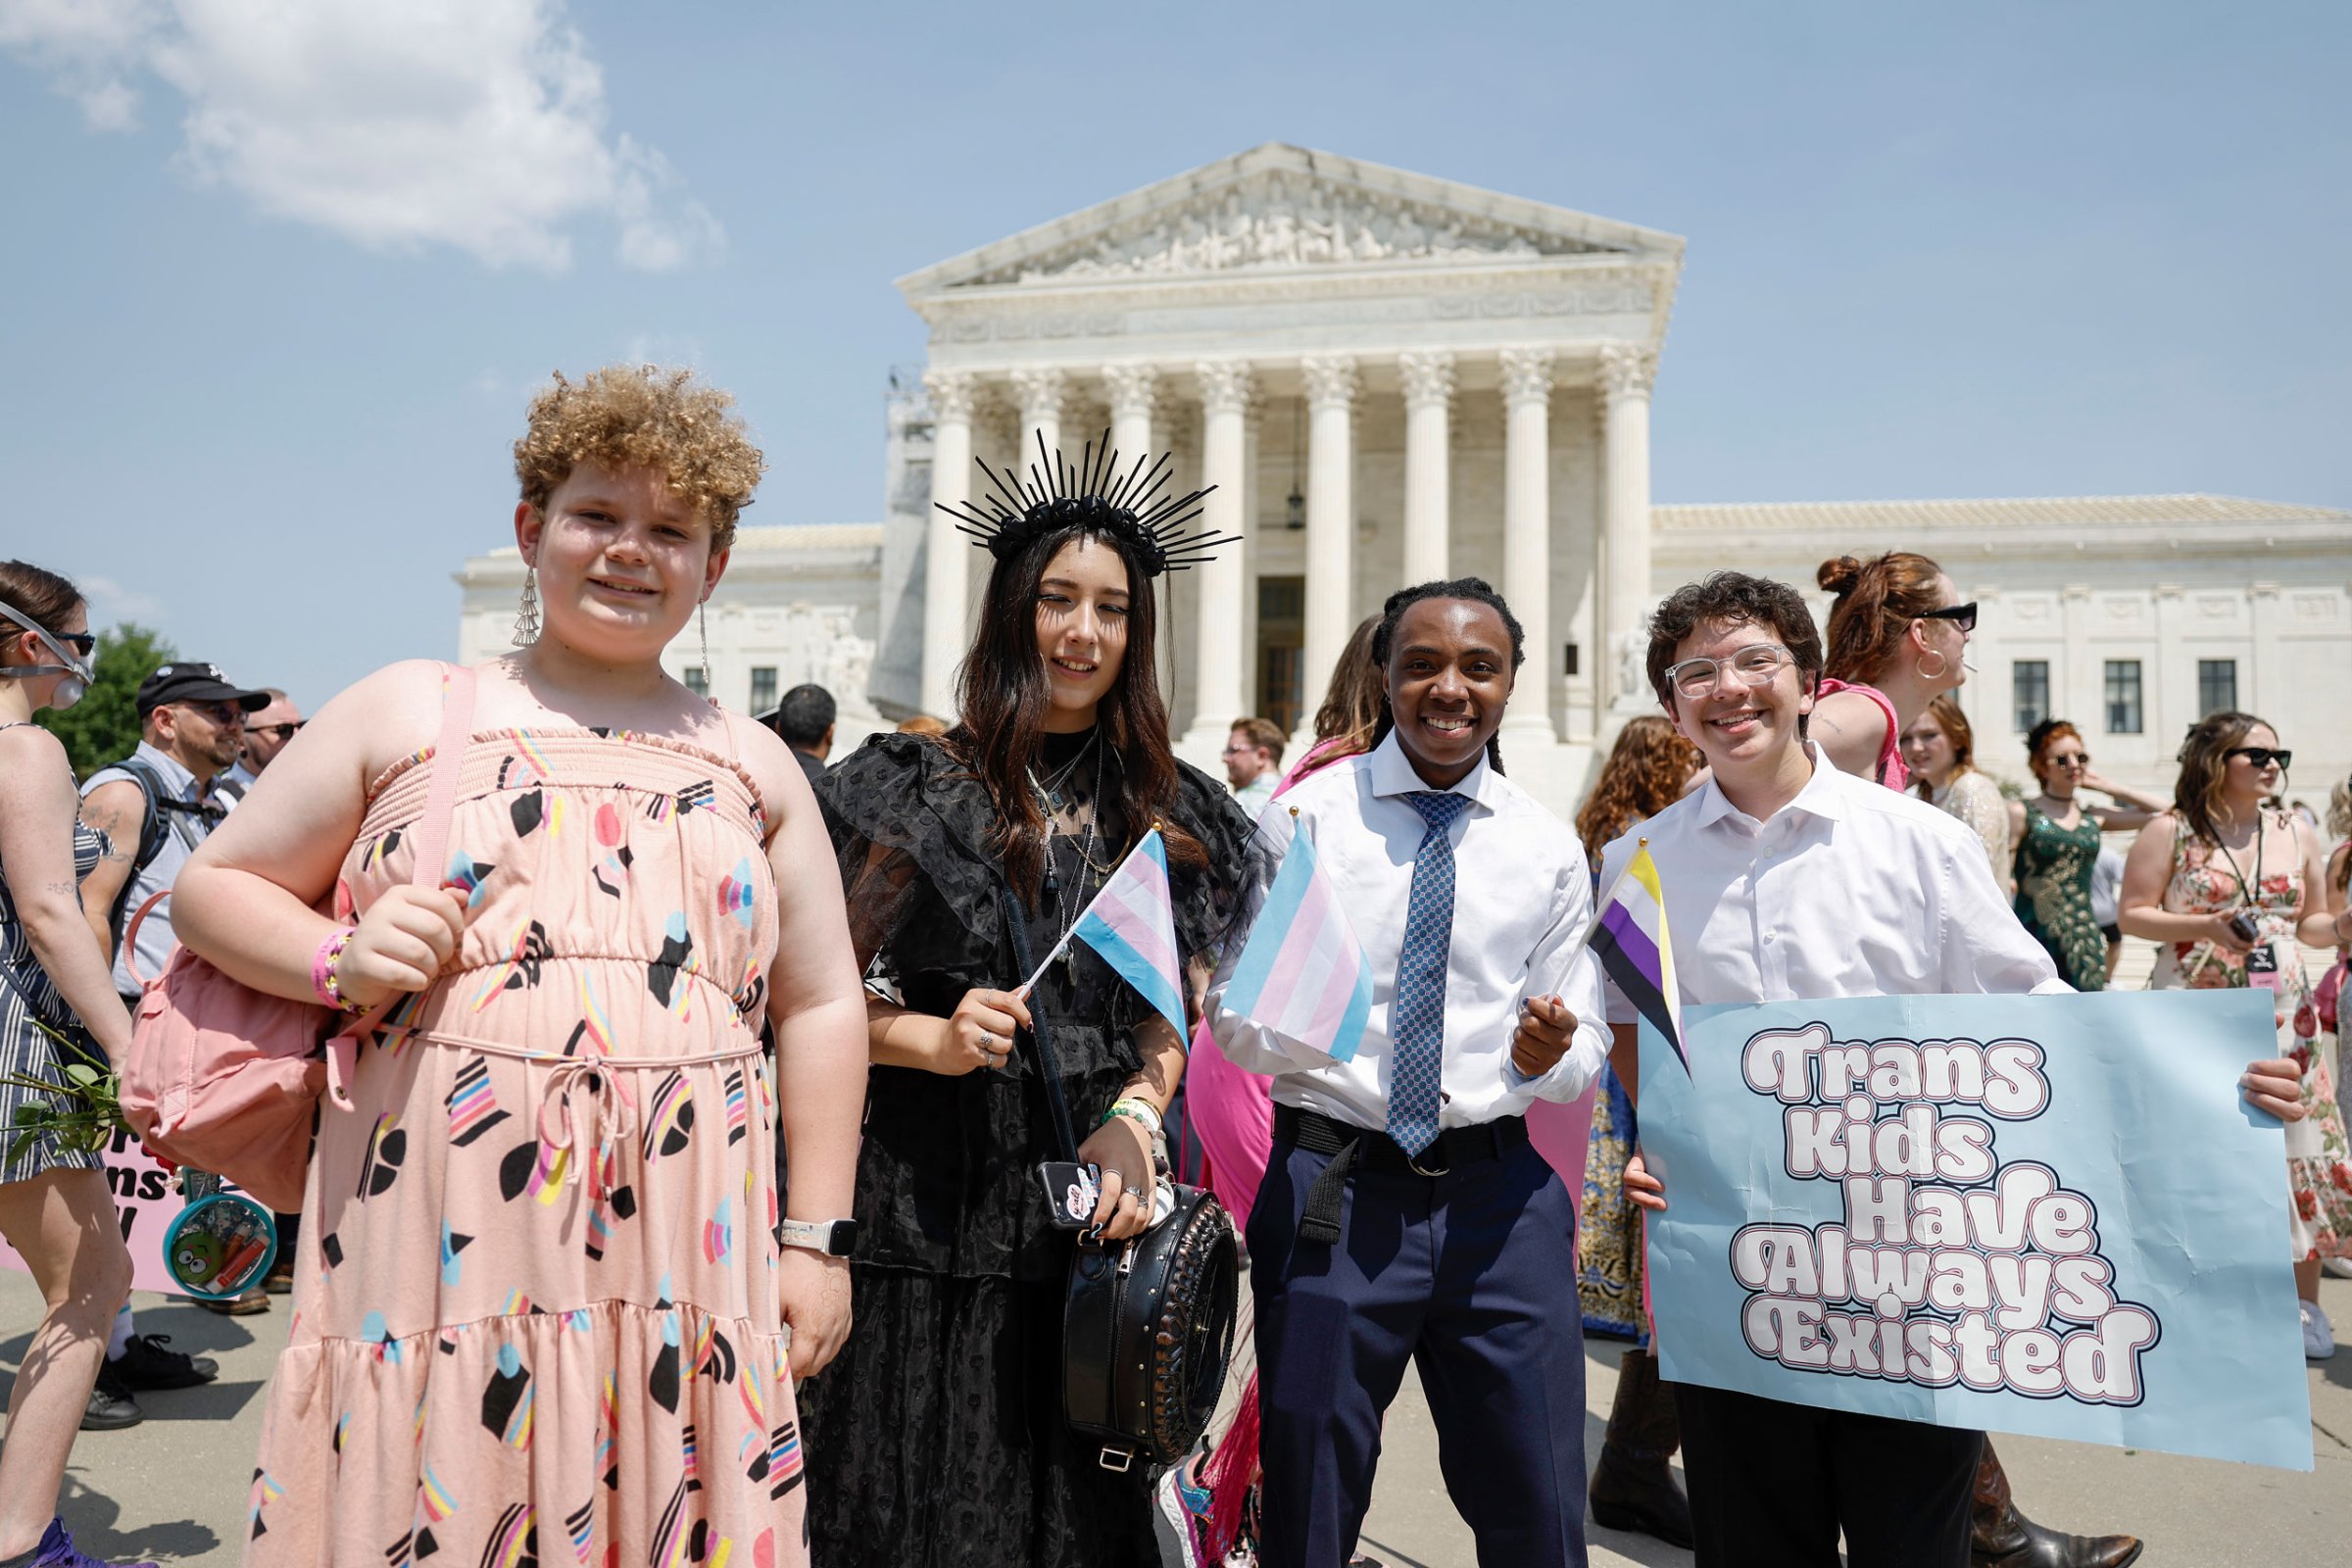 Grayson McFerrin, 12, Libby Gonzales, 13, Hobbes Chukumba, 16, and Daniel Trujillo, 15, the organizers of the “Trans Youth Prom” pose for a photo in front of the U.S. Supreme Court Building in Washington, D.C.